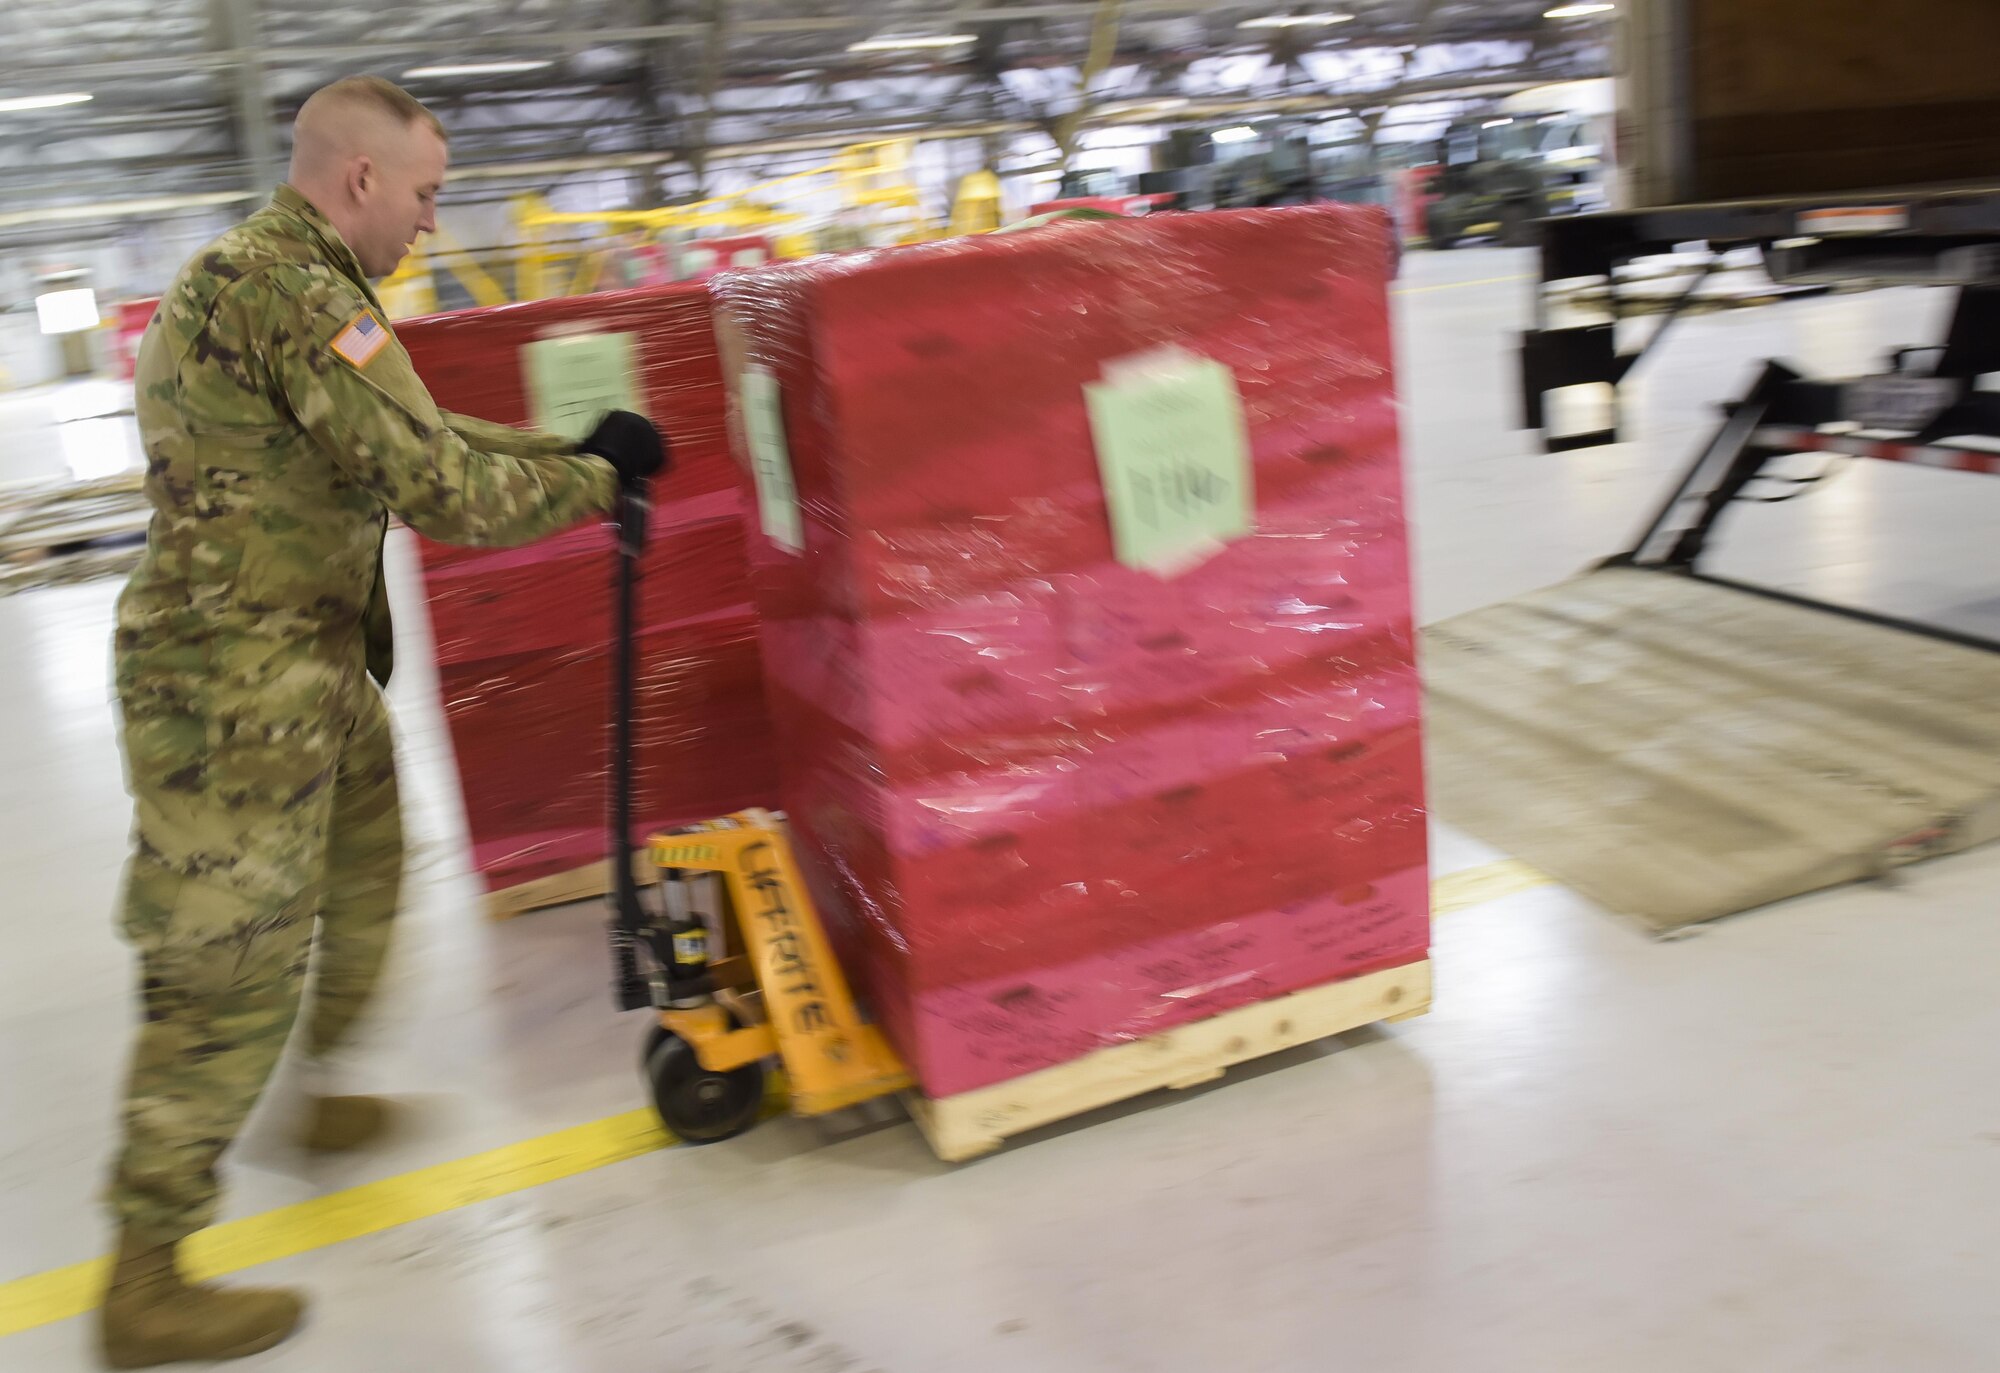 The Joint Records Team (JRT) officer in charge (OIC) of team DC, U.S. Army Capt. Scott McInernie, moves a pallet full of presidential records in a hangar on Joint Base Andrews, Md., Feb 14, 2017. The JRT was made up of Airmen assigned to the Air Force District of Washington (AFDW) and Soldiers from the U.S. Army's 3rd Infantry Division "The Old Guard" worked in concert with Presidential Material Handlers from the National Archives and Records Management (NARA) over several months to ensure the safe movement of the records and artifacts gathered during the eight years of President Obama's administration. The JRT was tasked with helping to inventory, prepare for shipping, palletize and load several tons of paper records, terabytes of electronic records, and thousands of artifacts. Along with several truck shipments the bulk of the materials were loaded onto and Air Force C-5 Galaxy cargo aircraft brought in from Dover Air Force Base, Del., and were then flown to Chicago, Ill., where they were placed in secure storage until completion of Obama's Presidential Library. The library is part of the presidential library system, which is administered by the National Archives and Records Administration. (U.S. Air Force photo/Jim Varhegyi) (released)